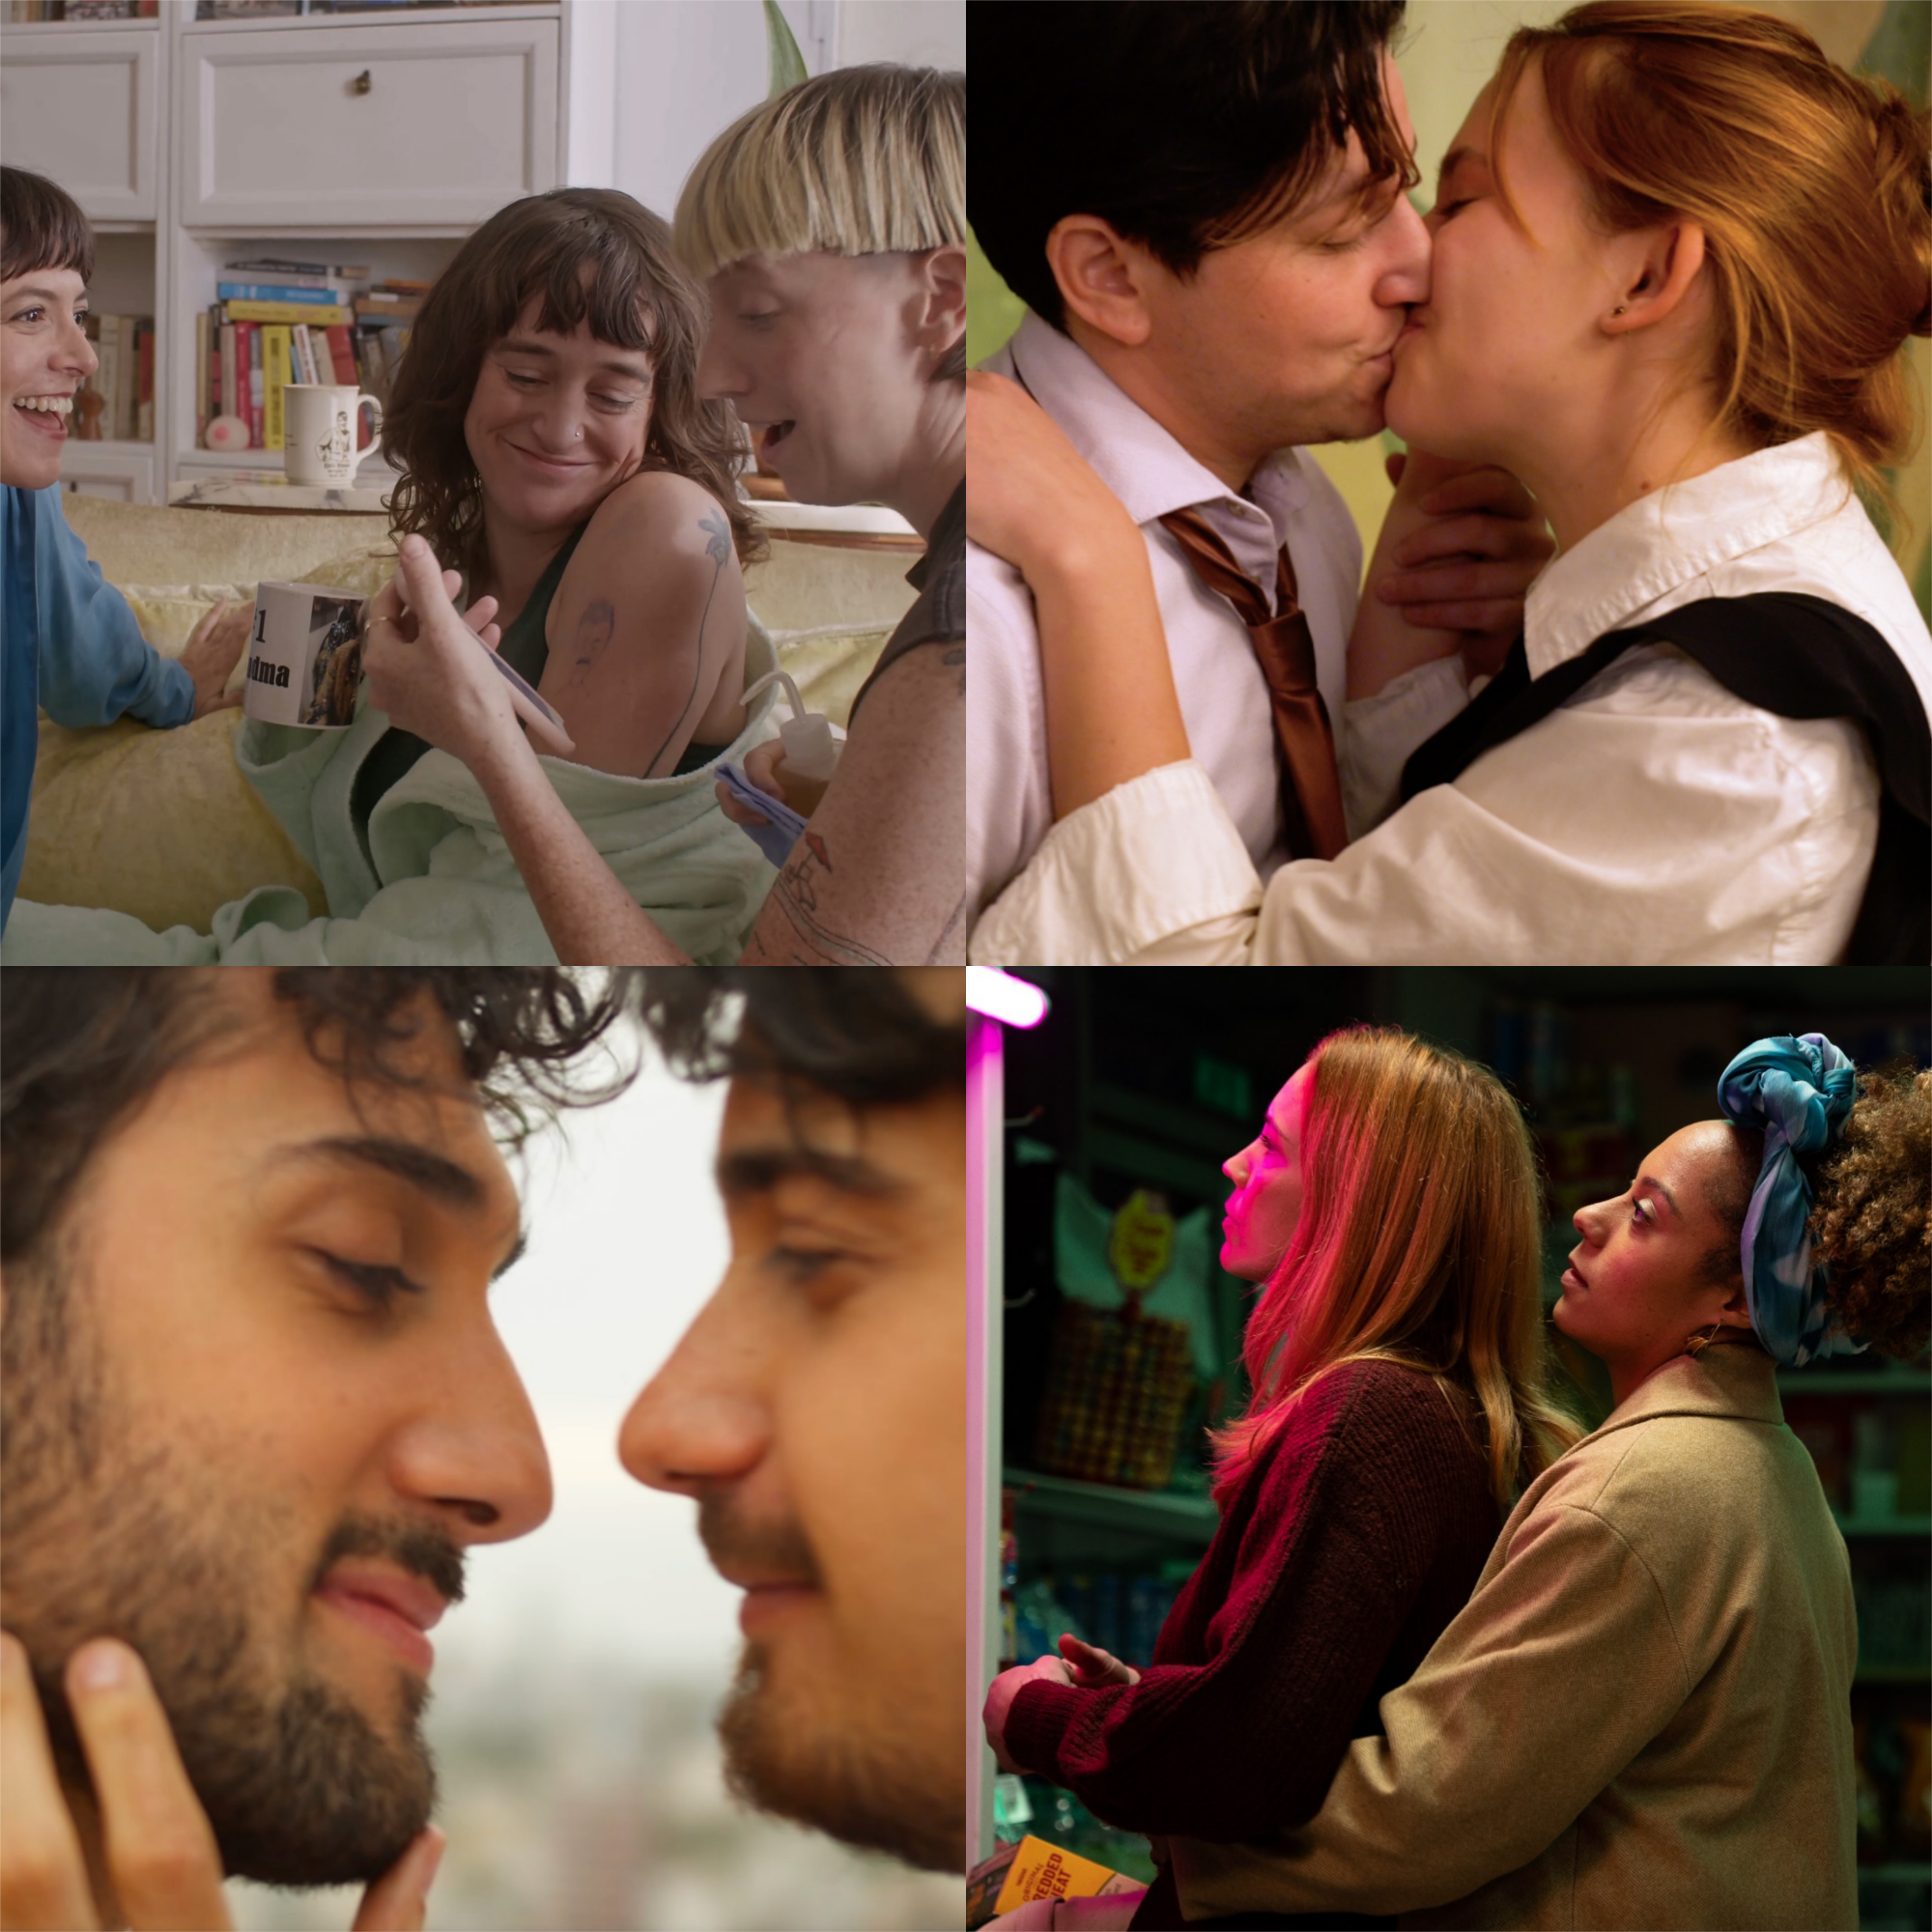 A collage of images: three people with trendy haircuts laugh while one reads from a phone, a man and woman (both in suits) kiss, two men smile as they look into each other's eyes, and two women embrace while standing in a corner shop.